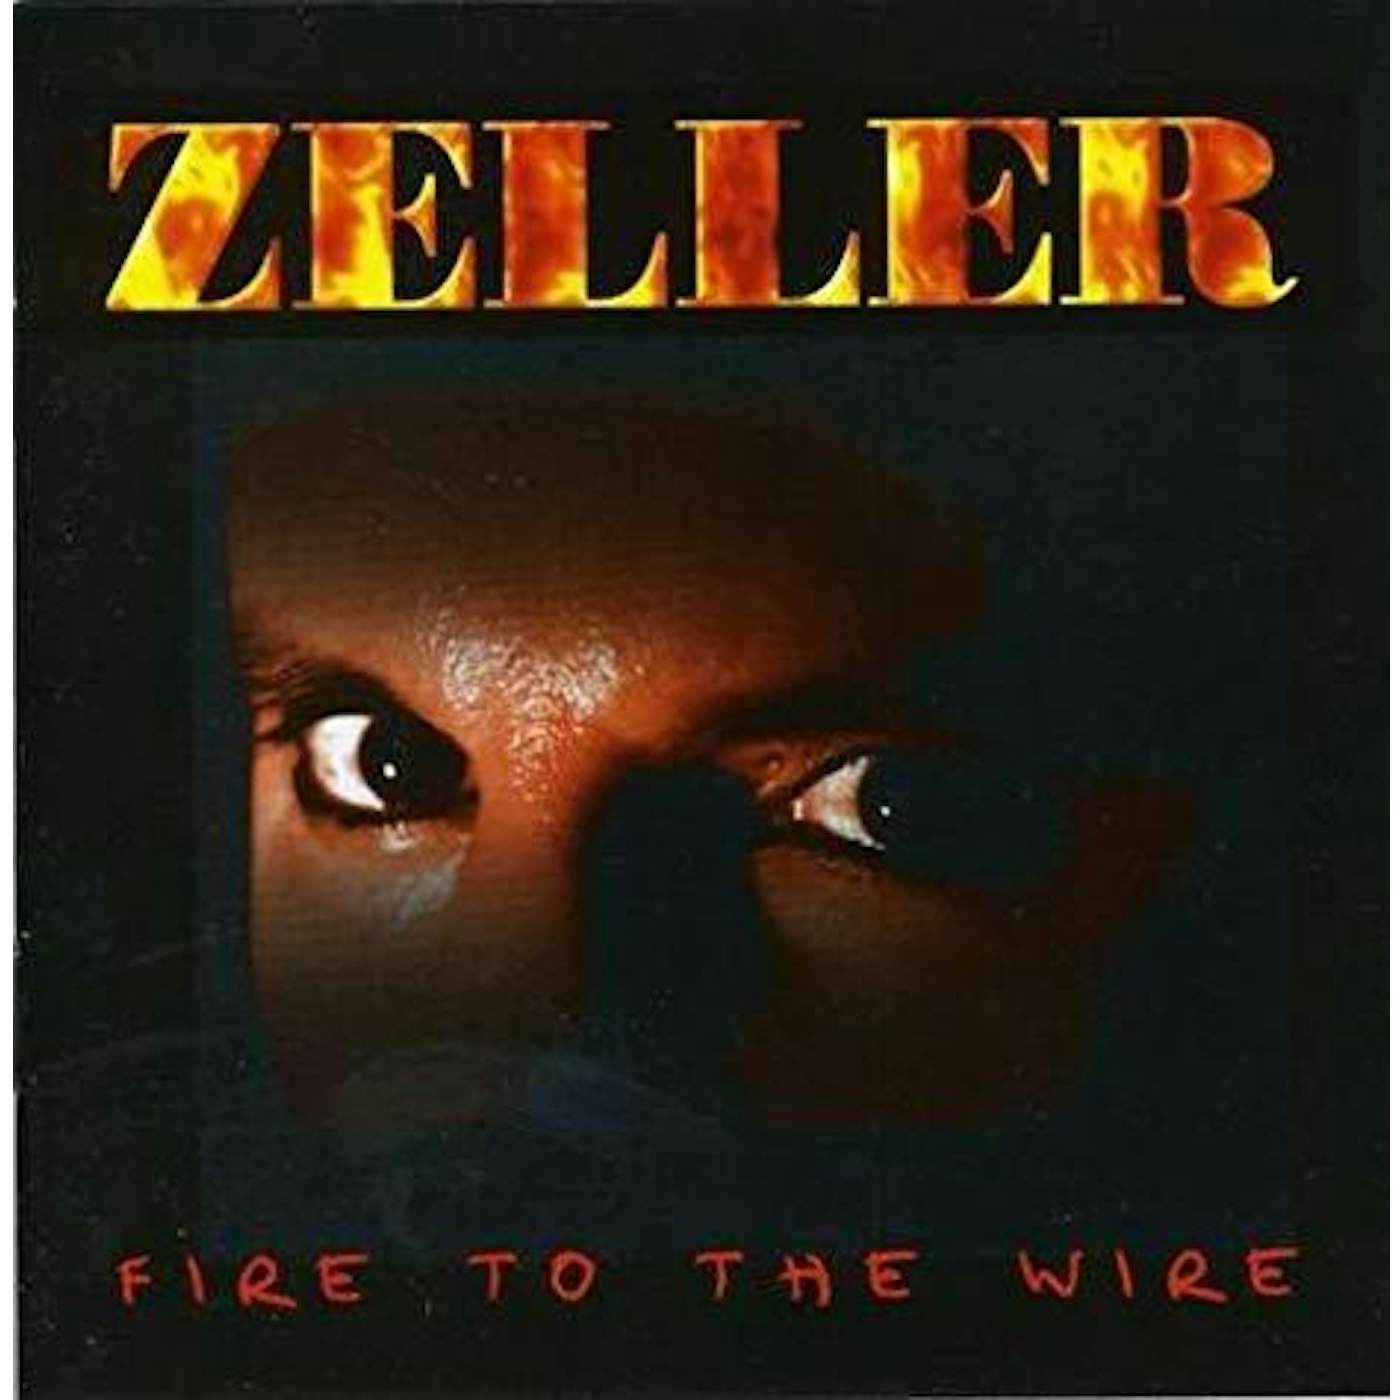 Jim Zeller / Fire To The Wire - CD